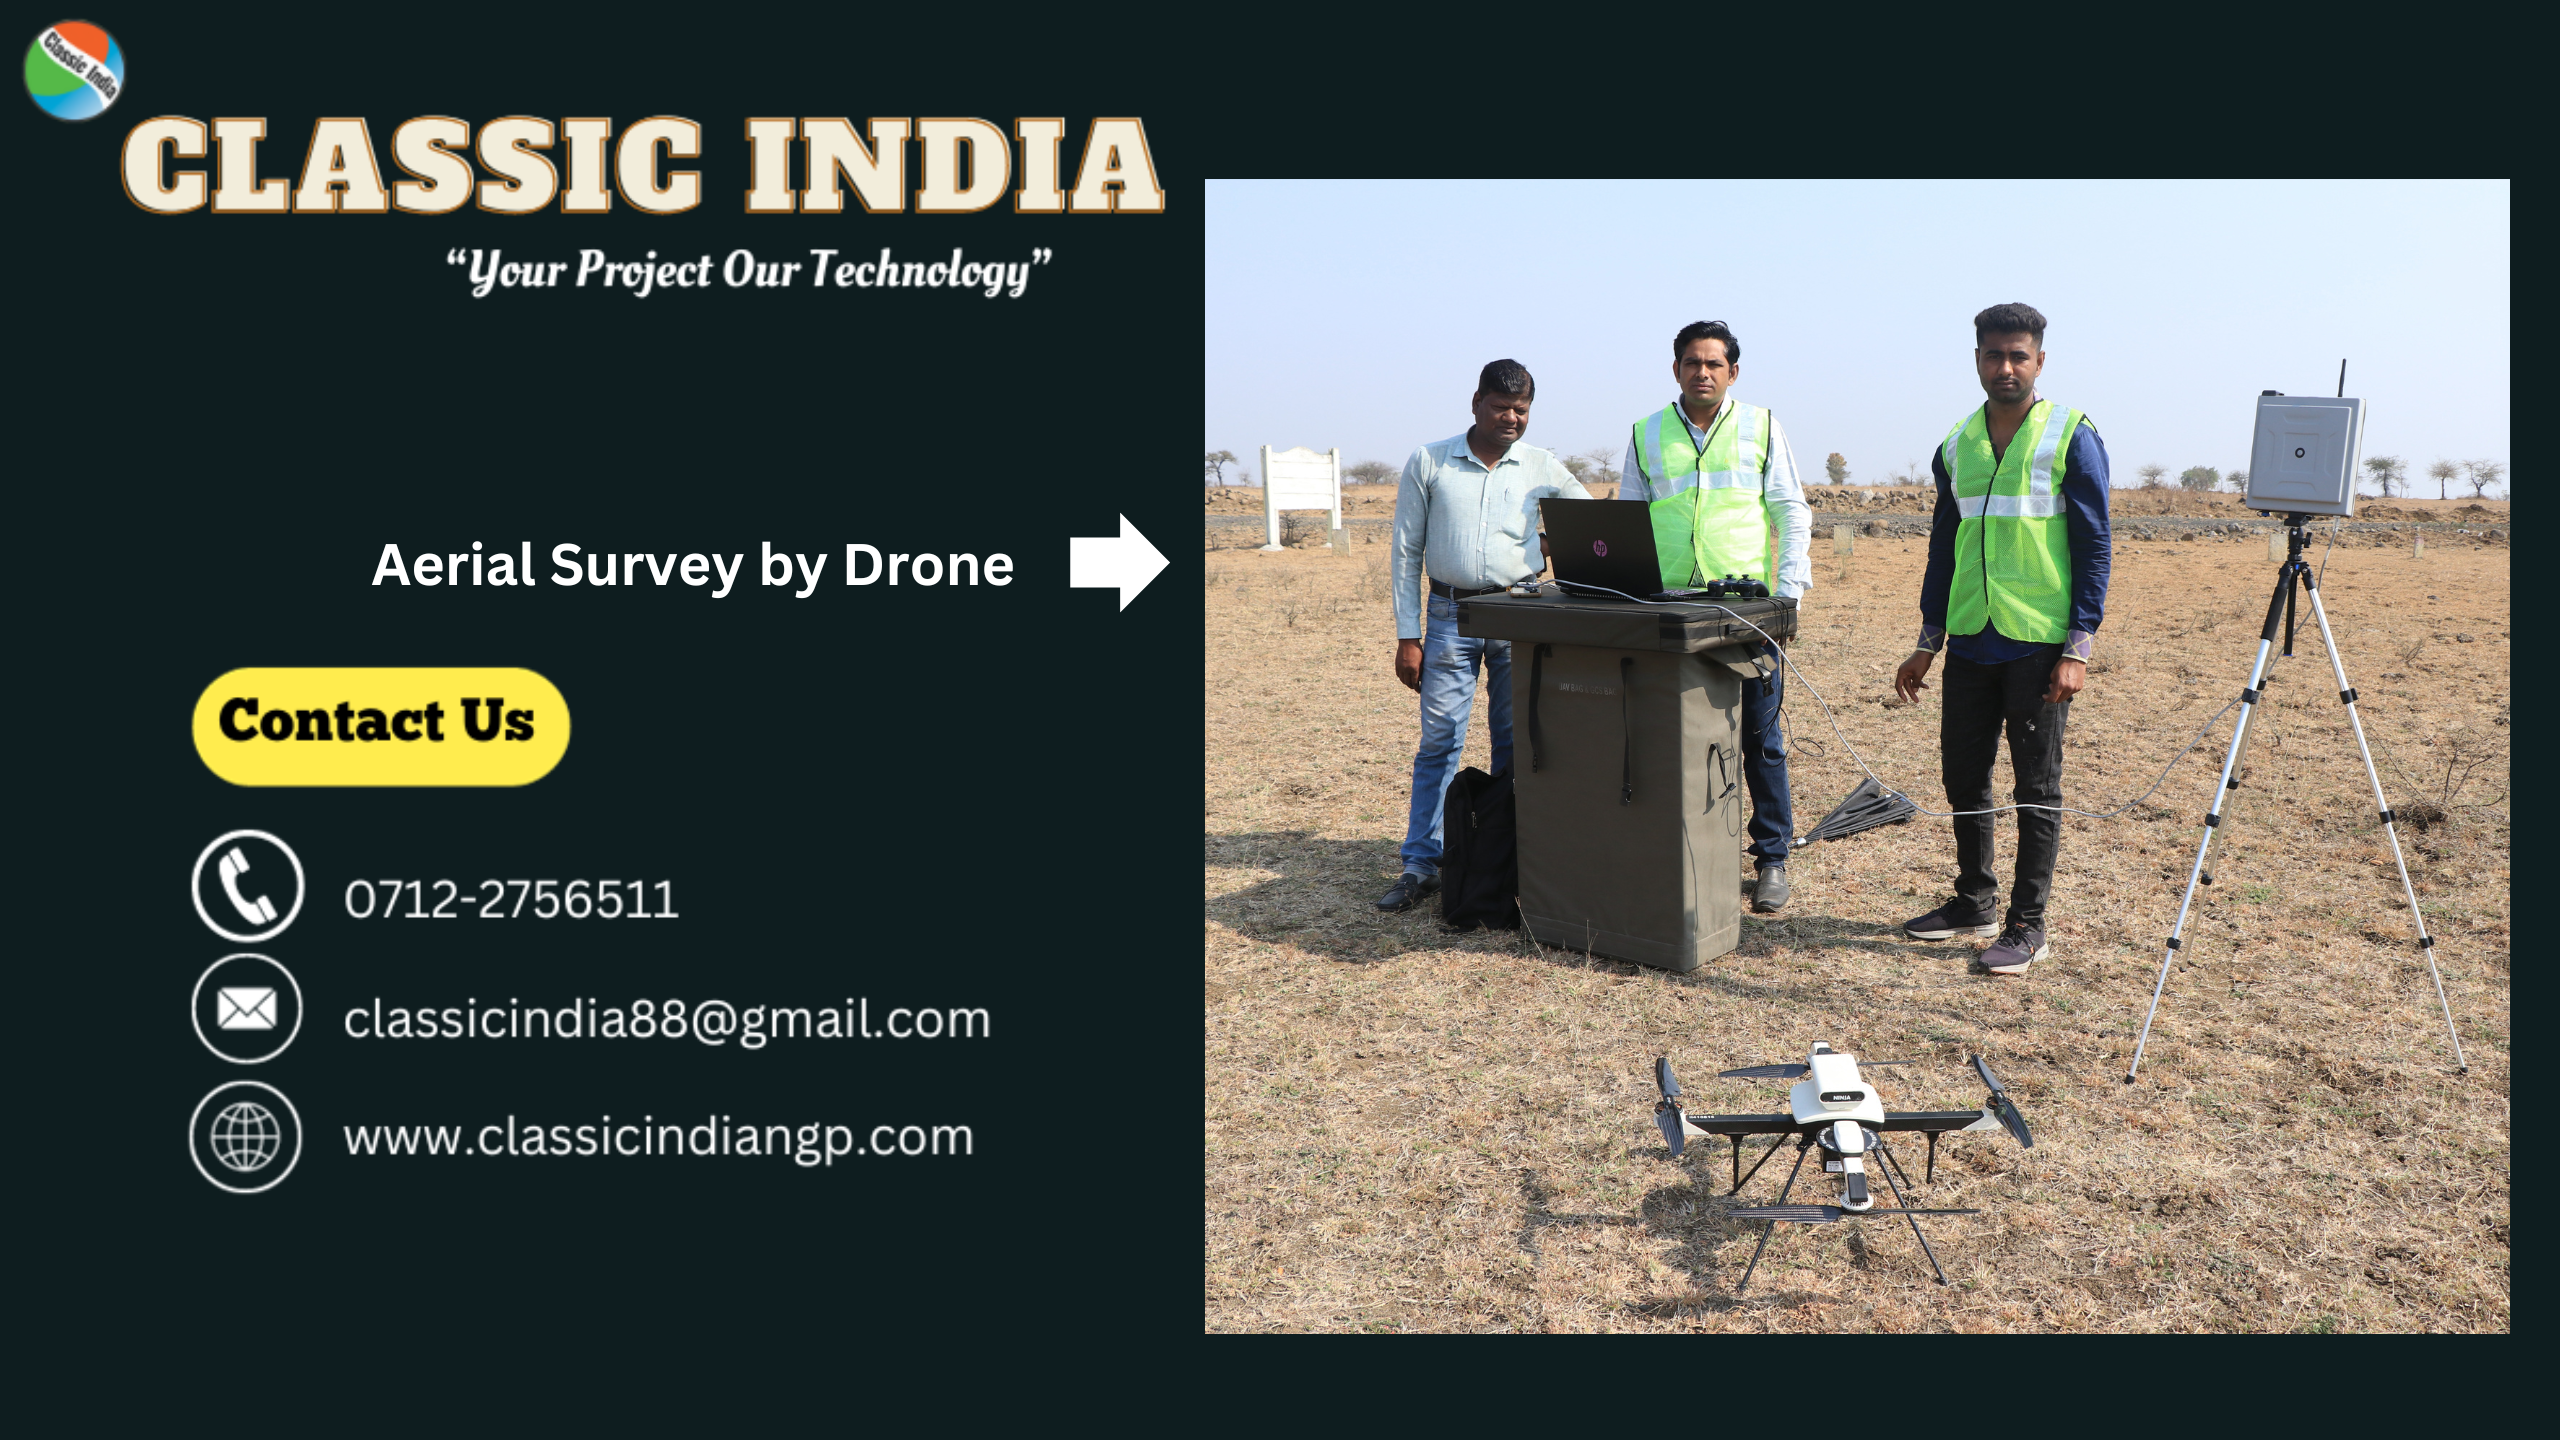 Aerial Survey by Drone